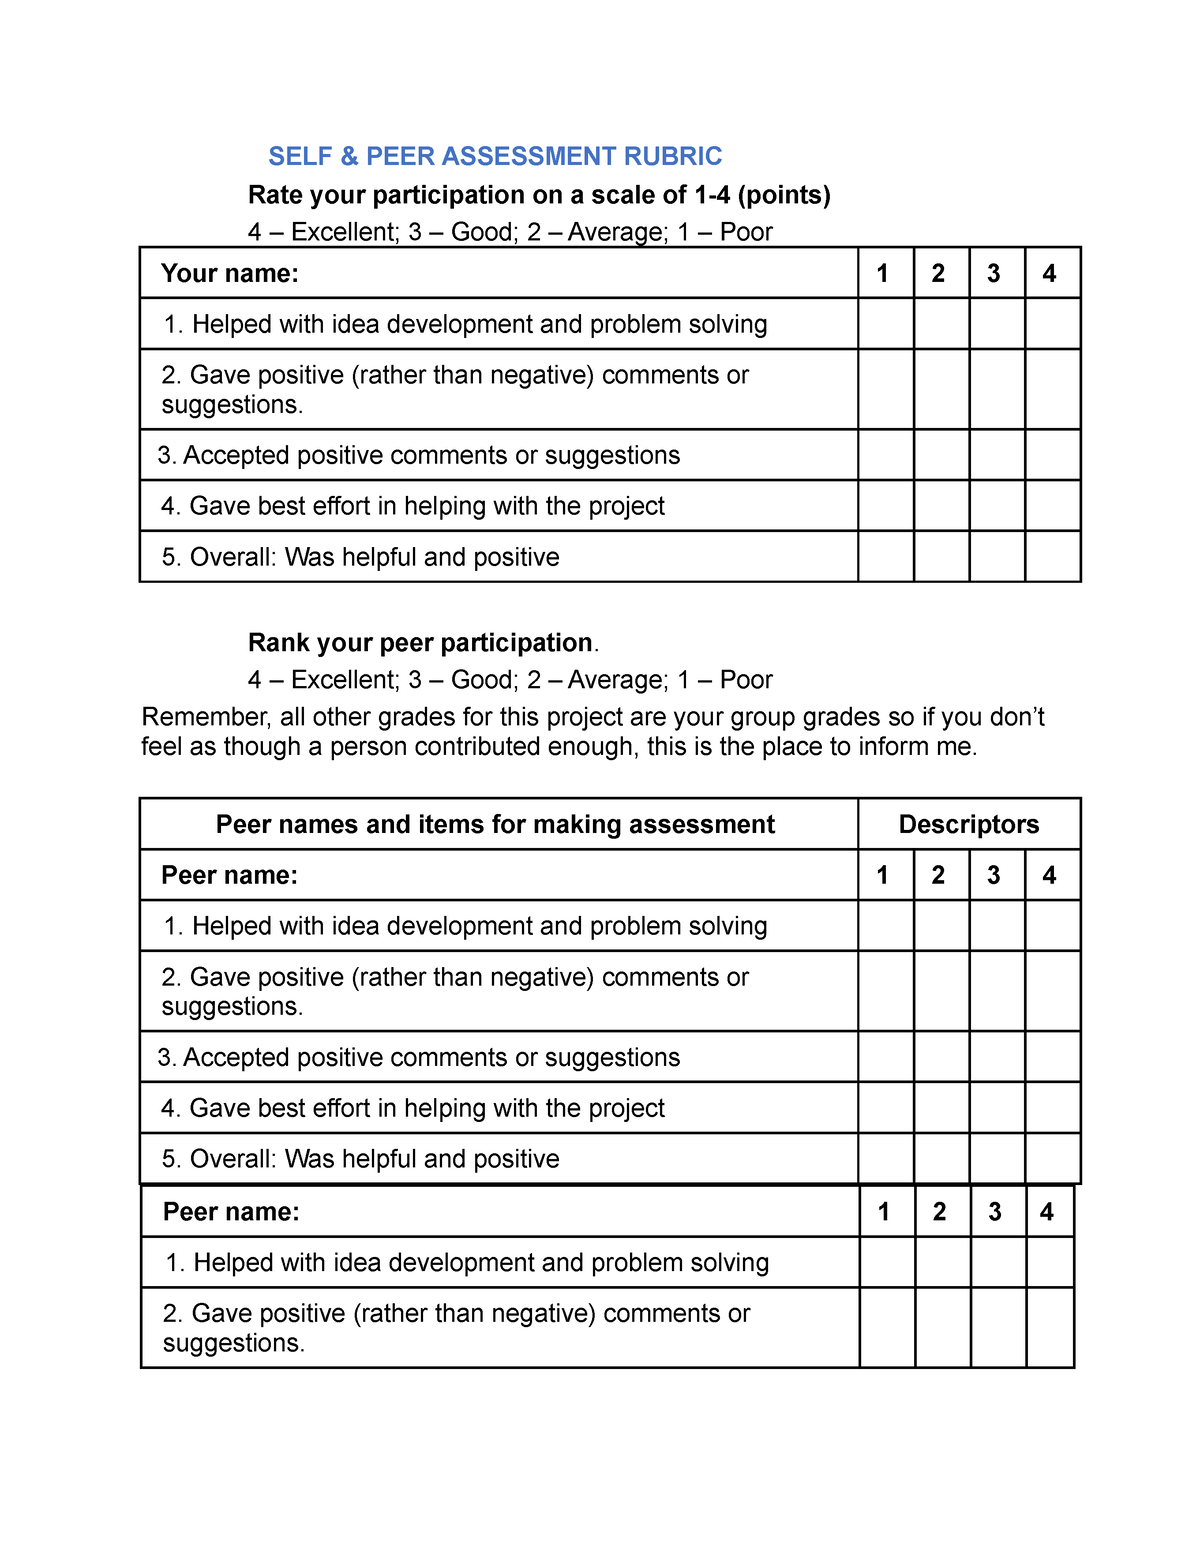 09e8b1af6a6a-grg43-self-peer-assessment-rubric-rate-your